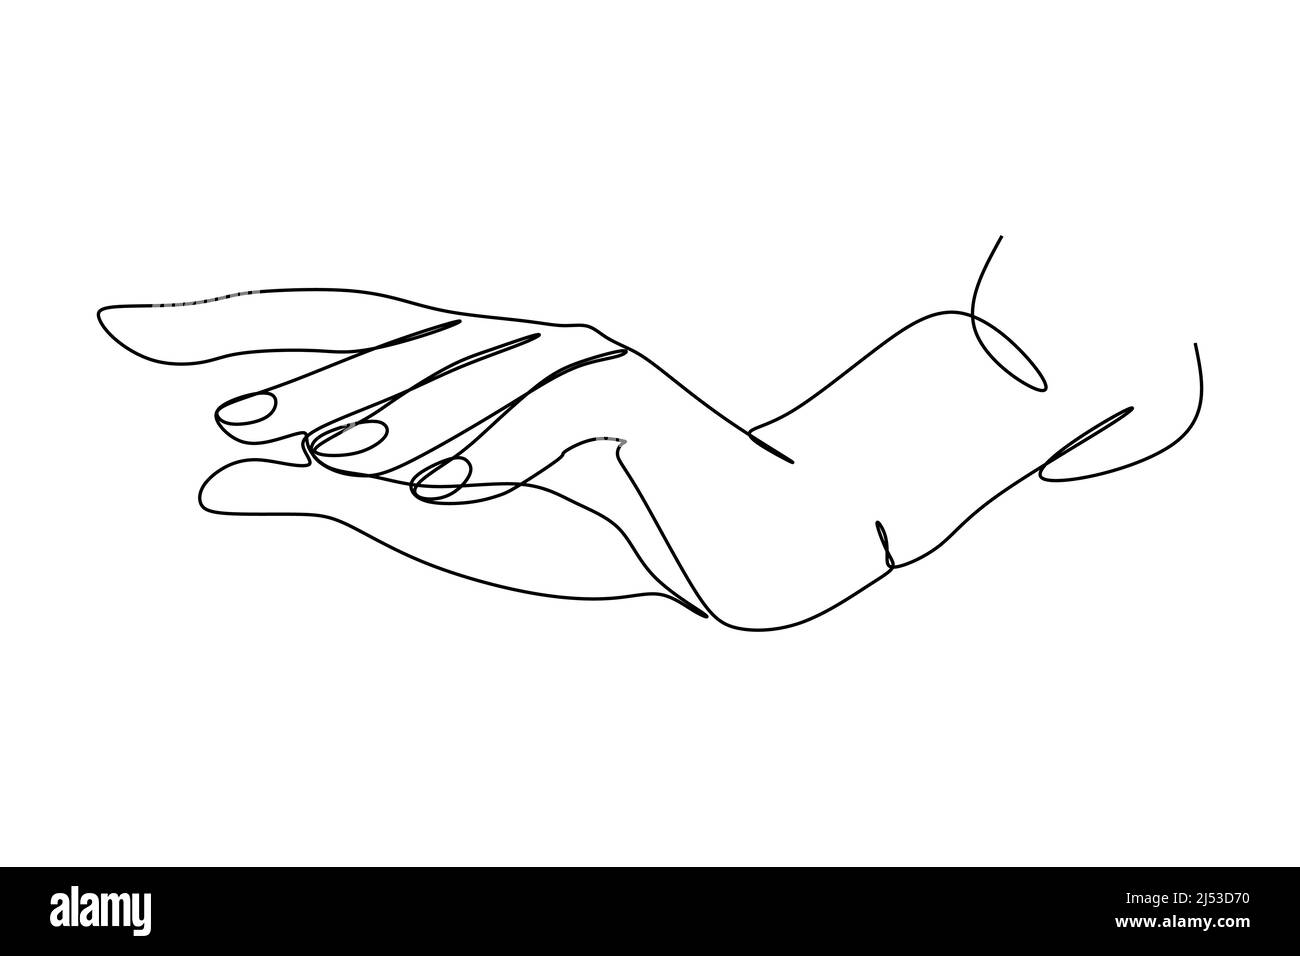 Continuous Line Drawing of Hand Trendy Minimalist Illustration. One Line Abstract Concept. Hands Minimalist Contour Drawing. Vector EPS 10 Stock Vector